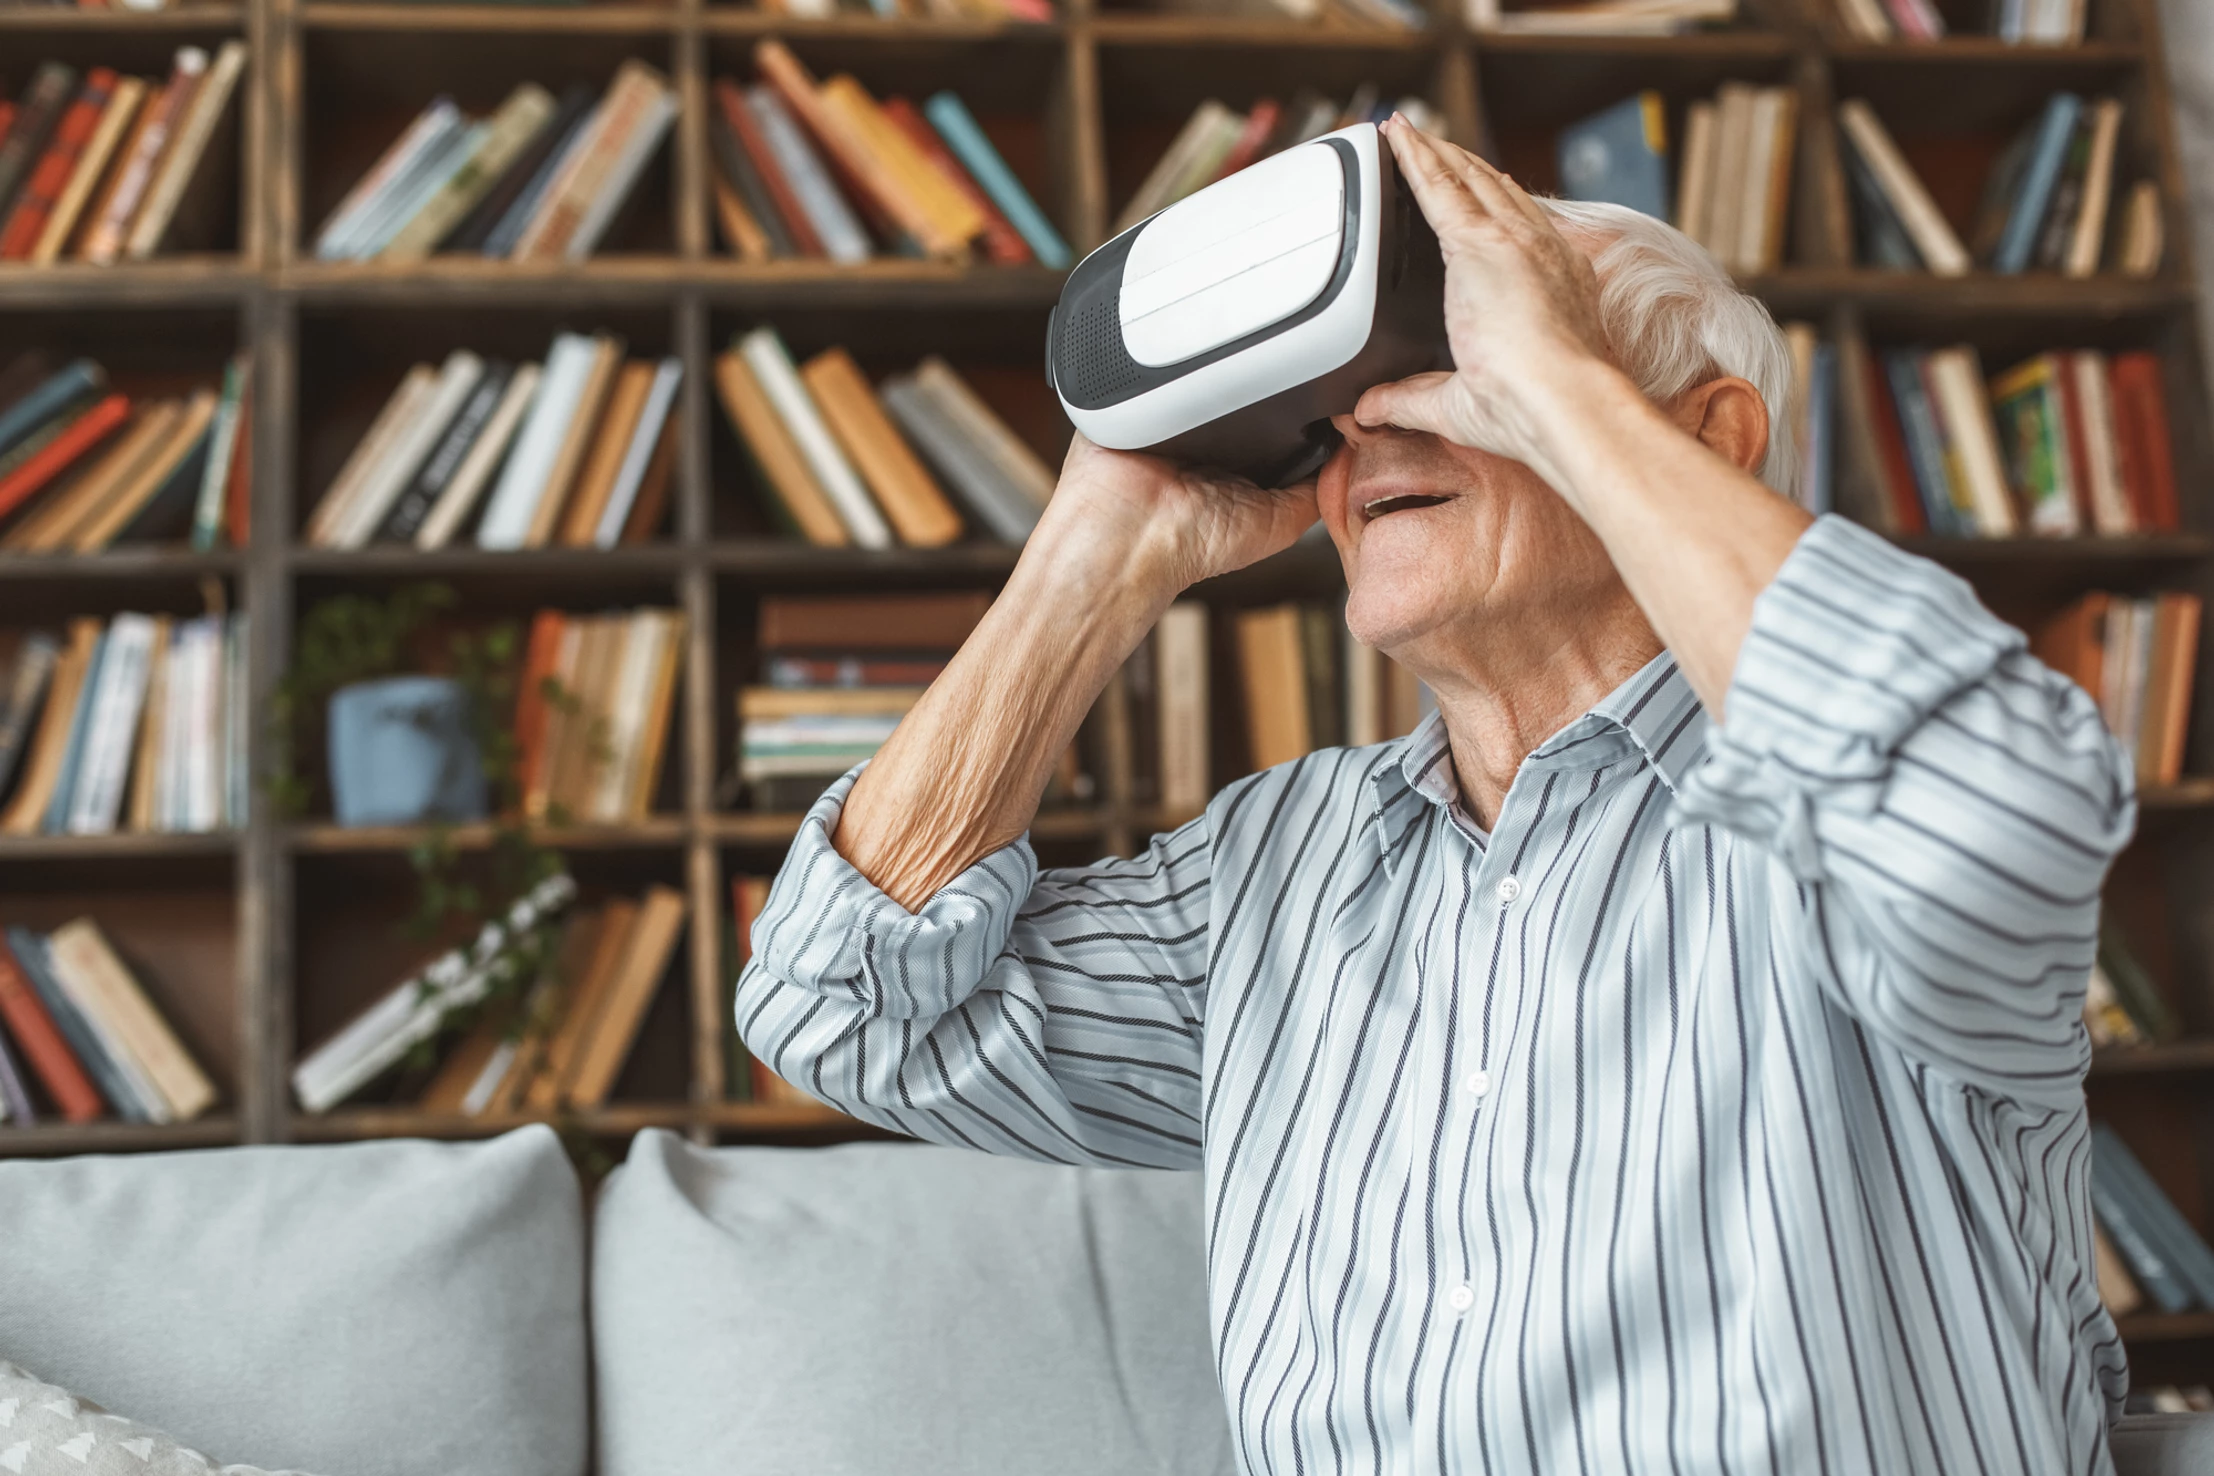 Virtual reality to work on wellbeing